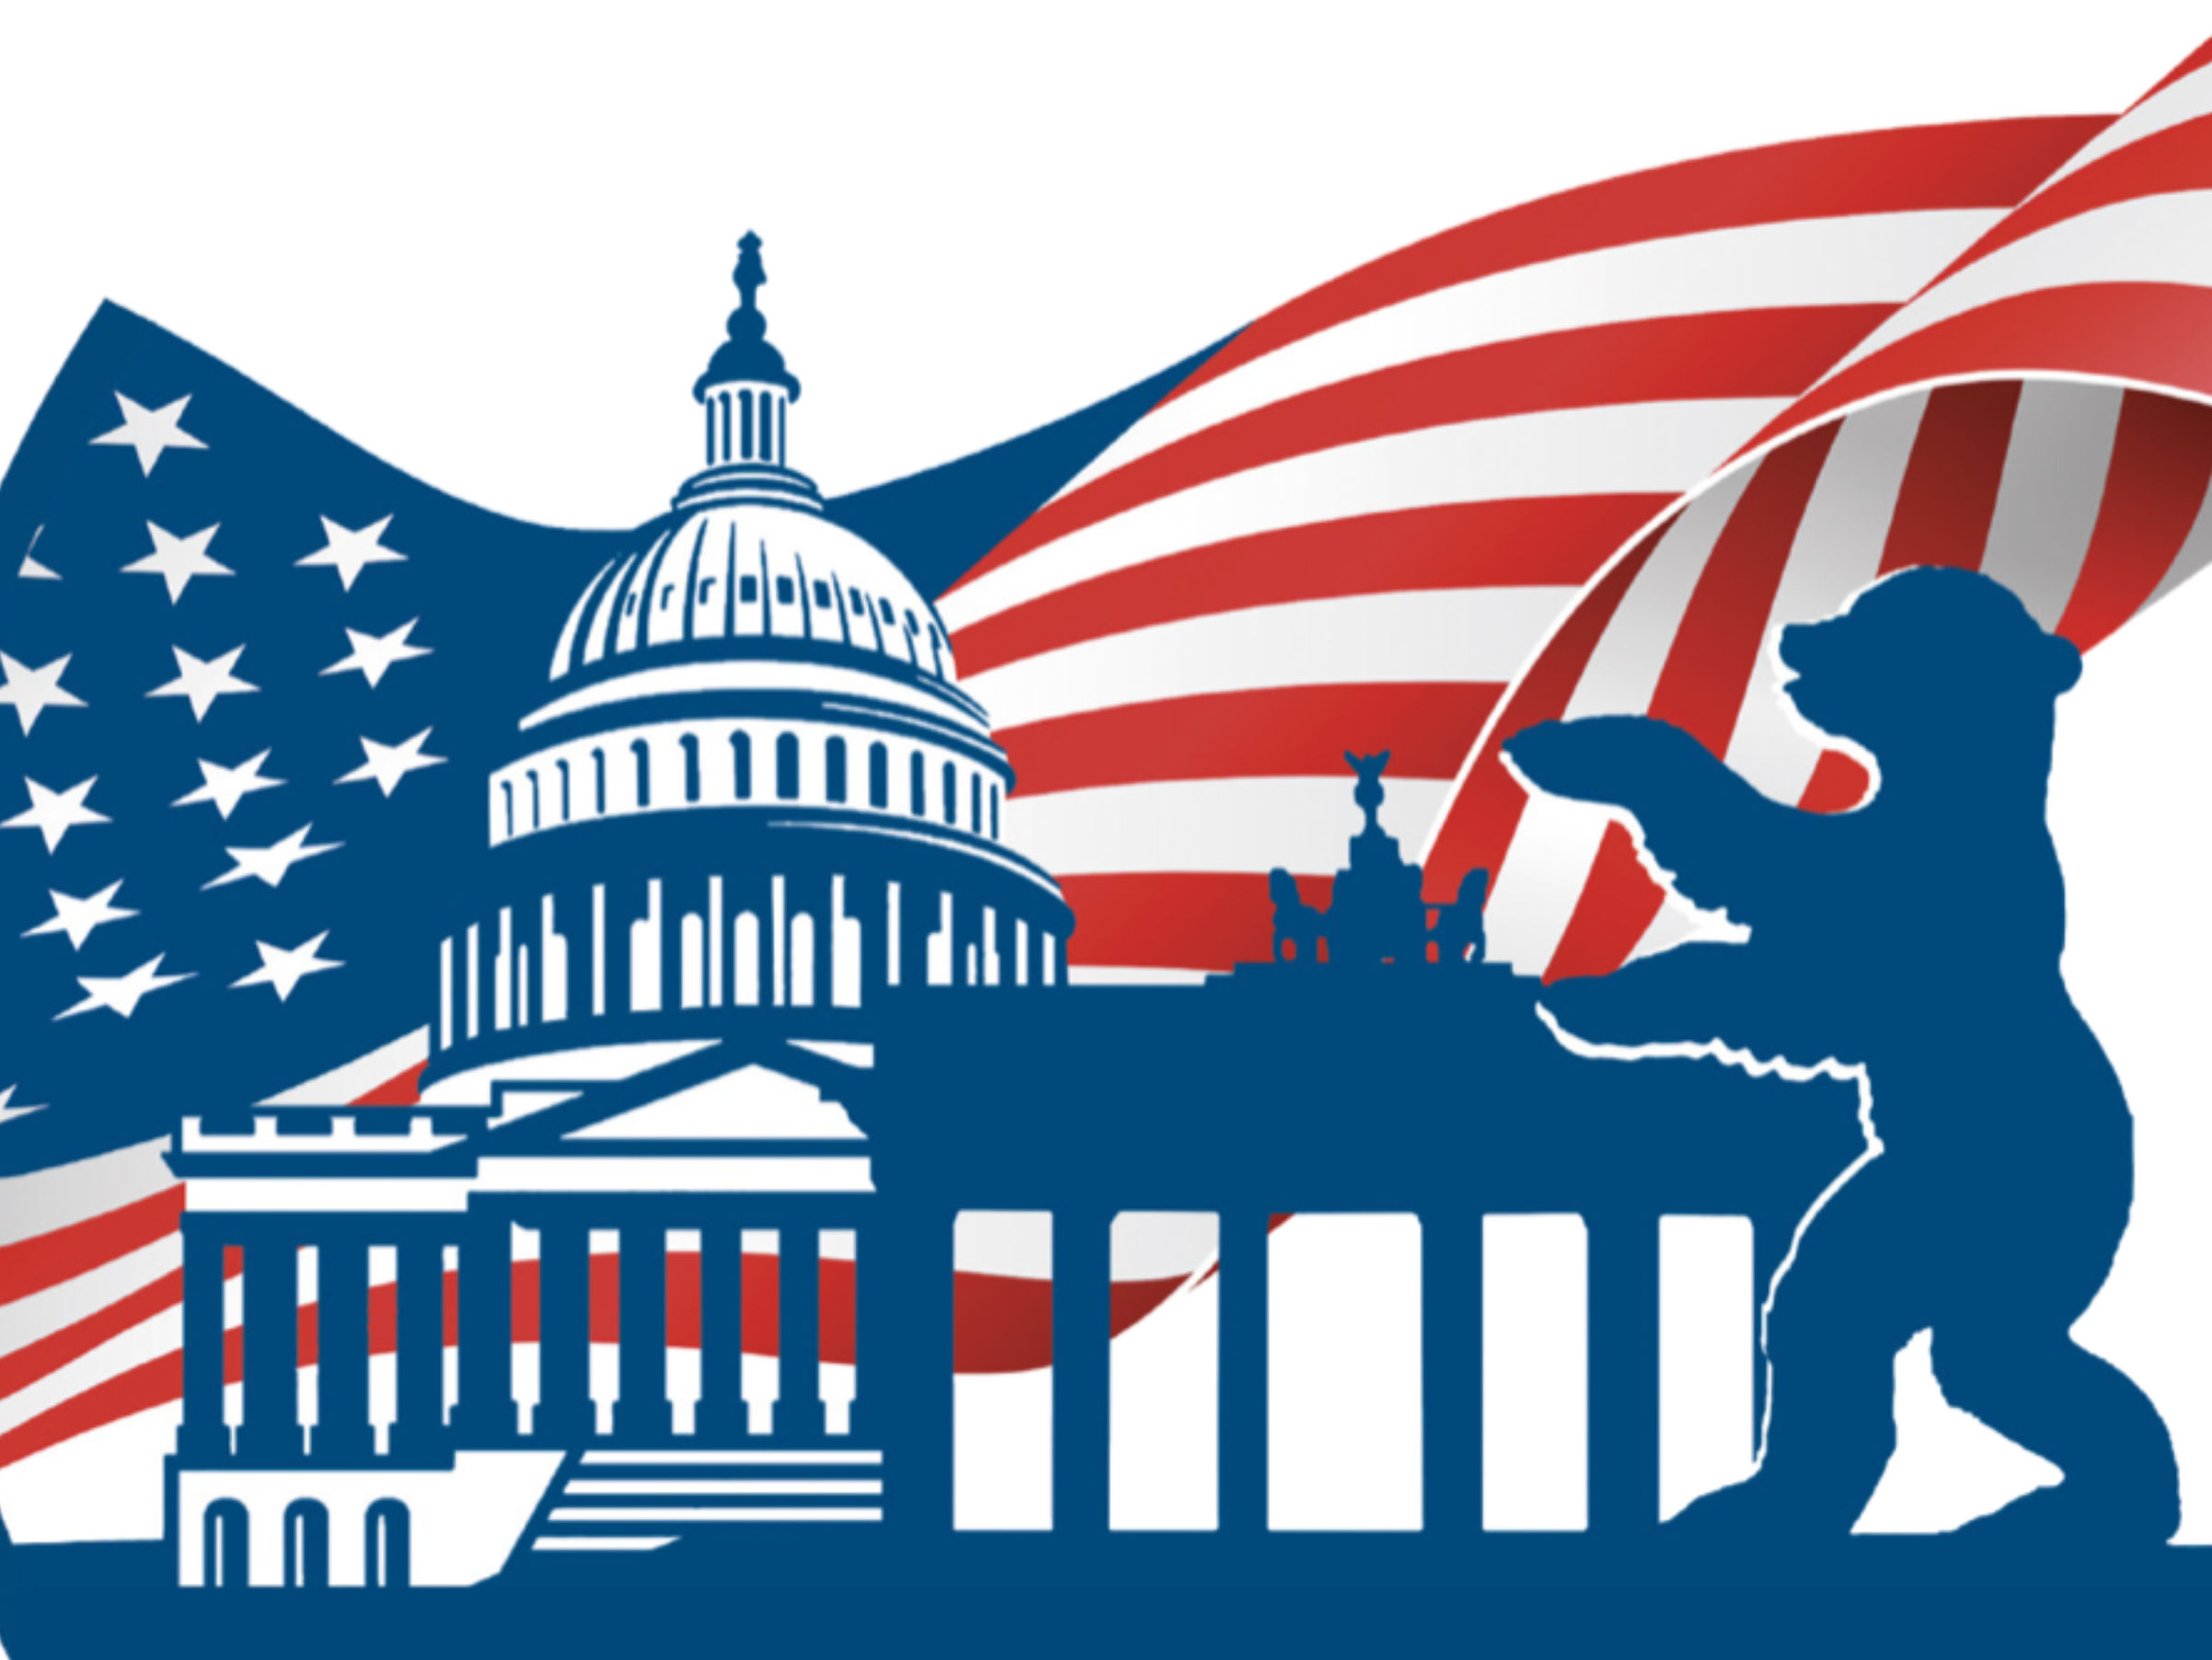 The Crossroads of Democracy: The 2024 US Presidential Election